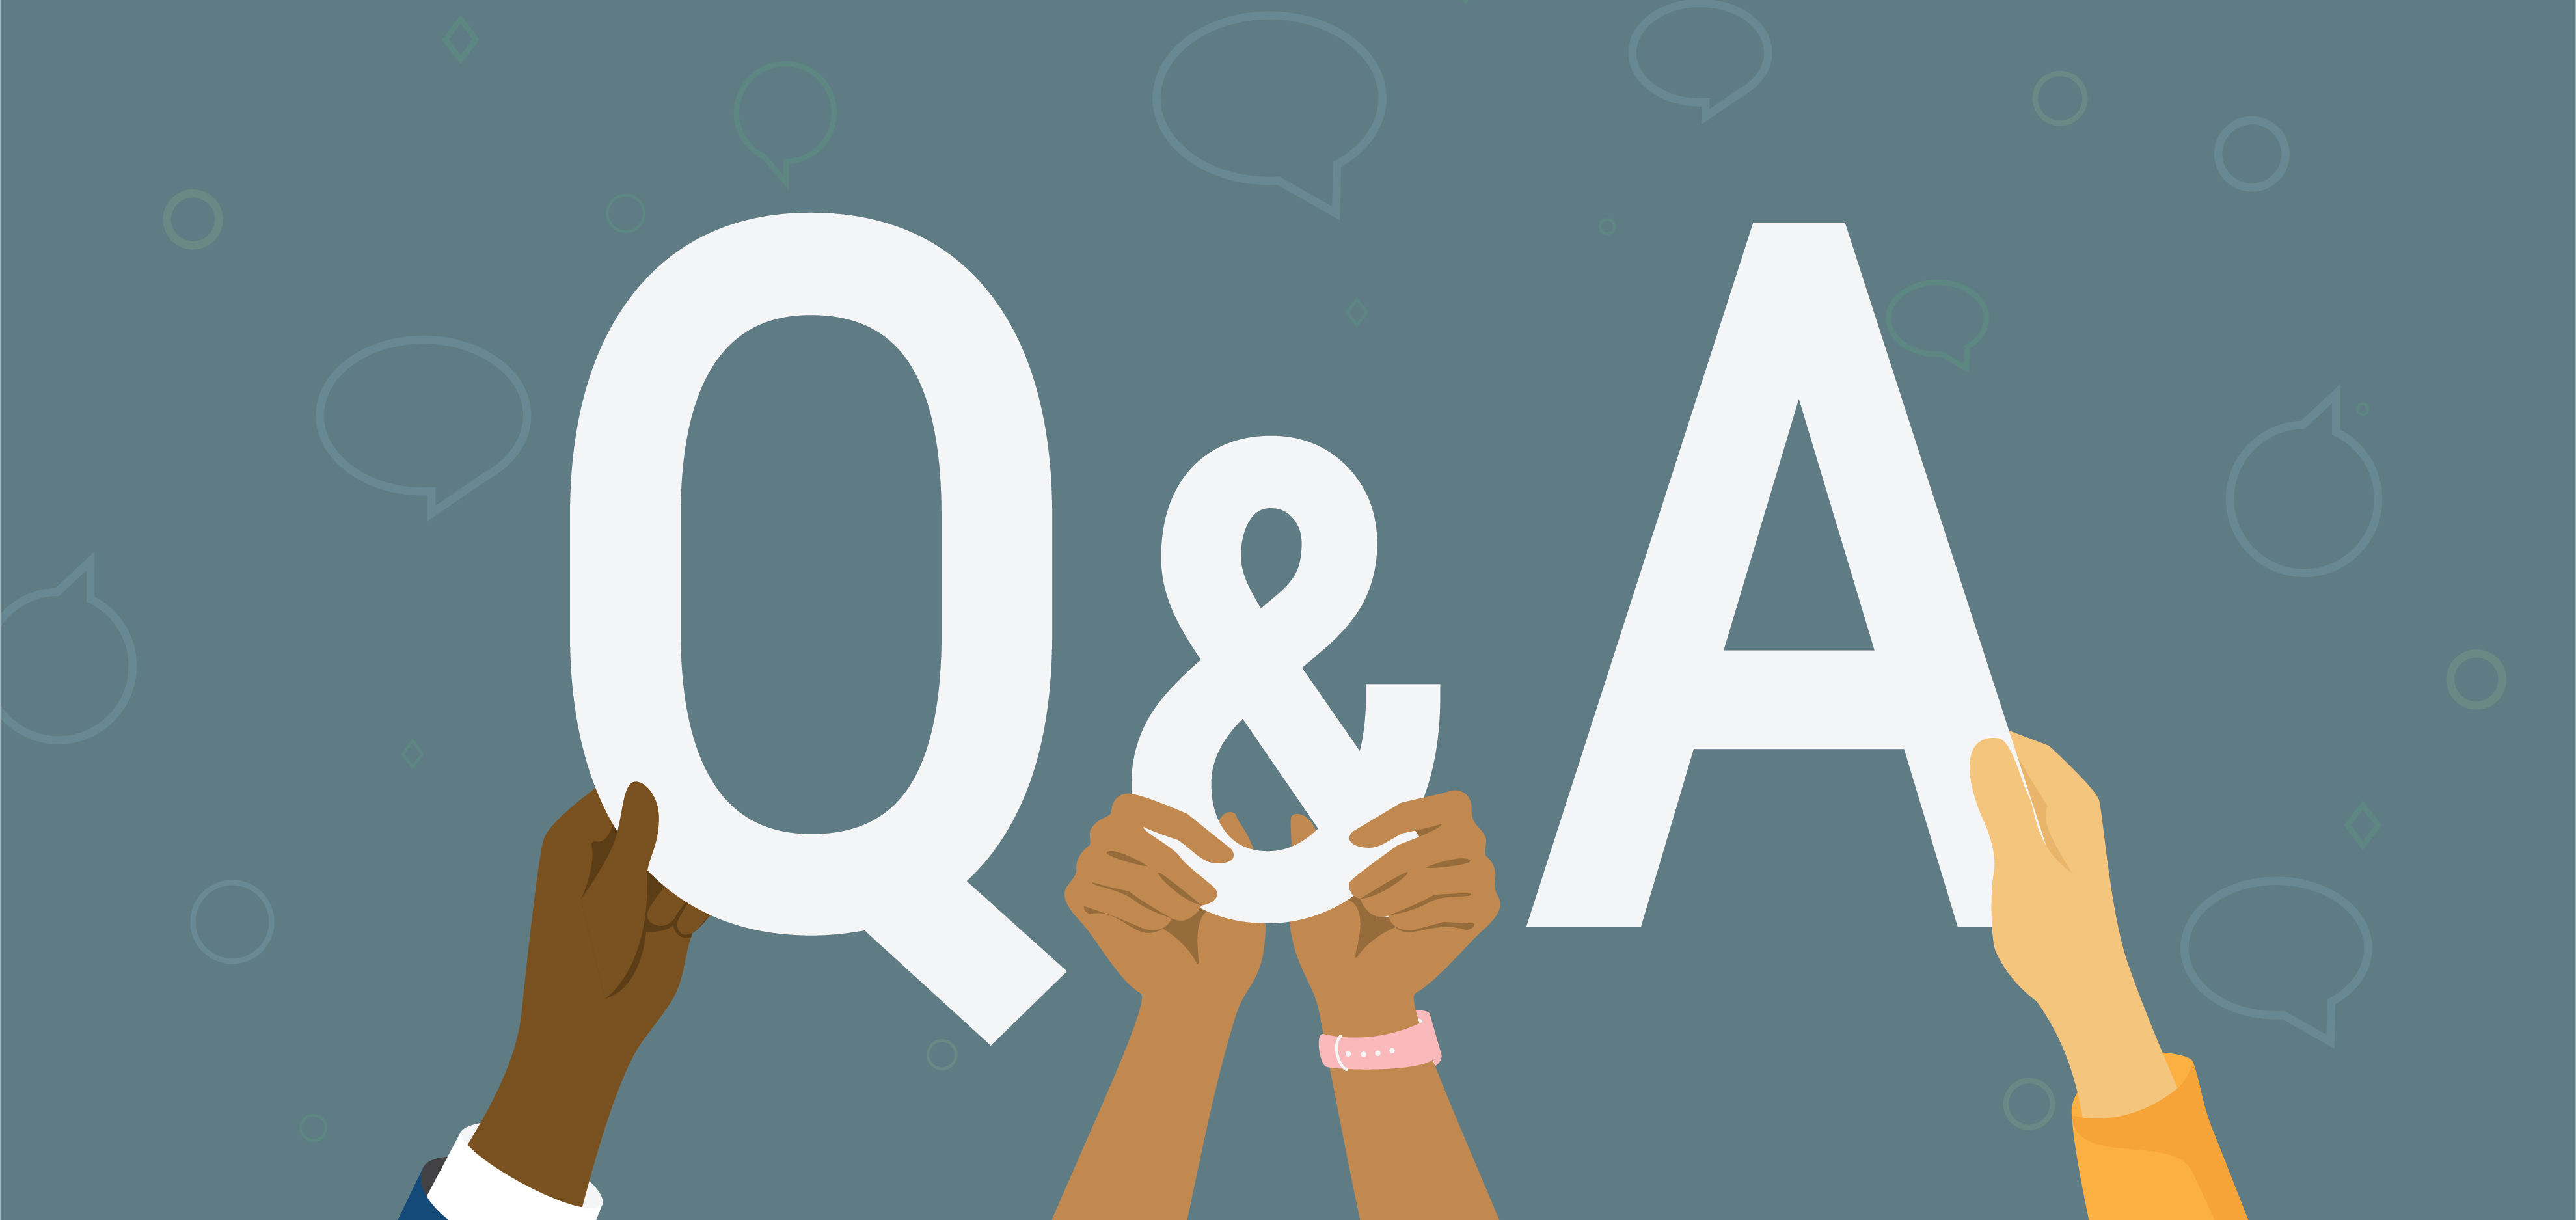 Illustration of hands holding up letters and characters reading "Q&A"